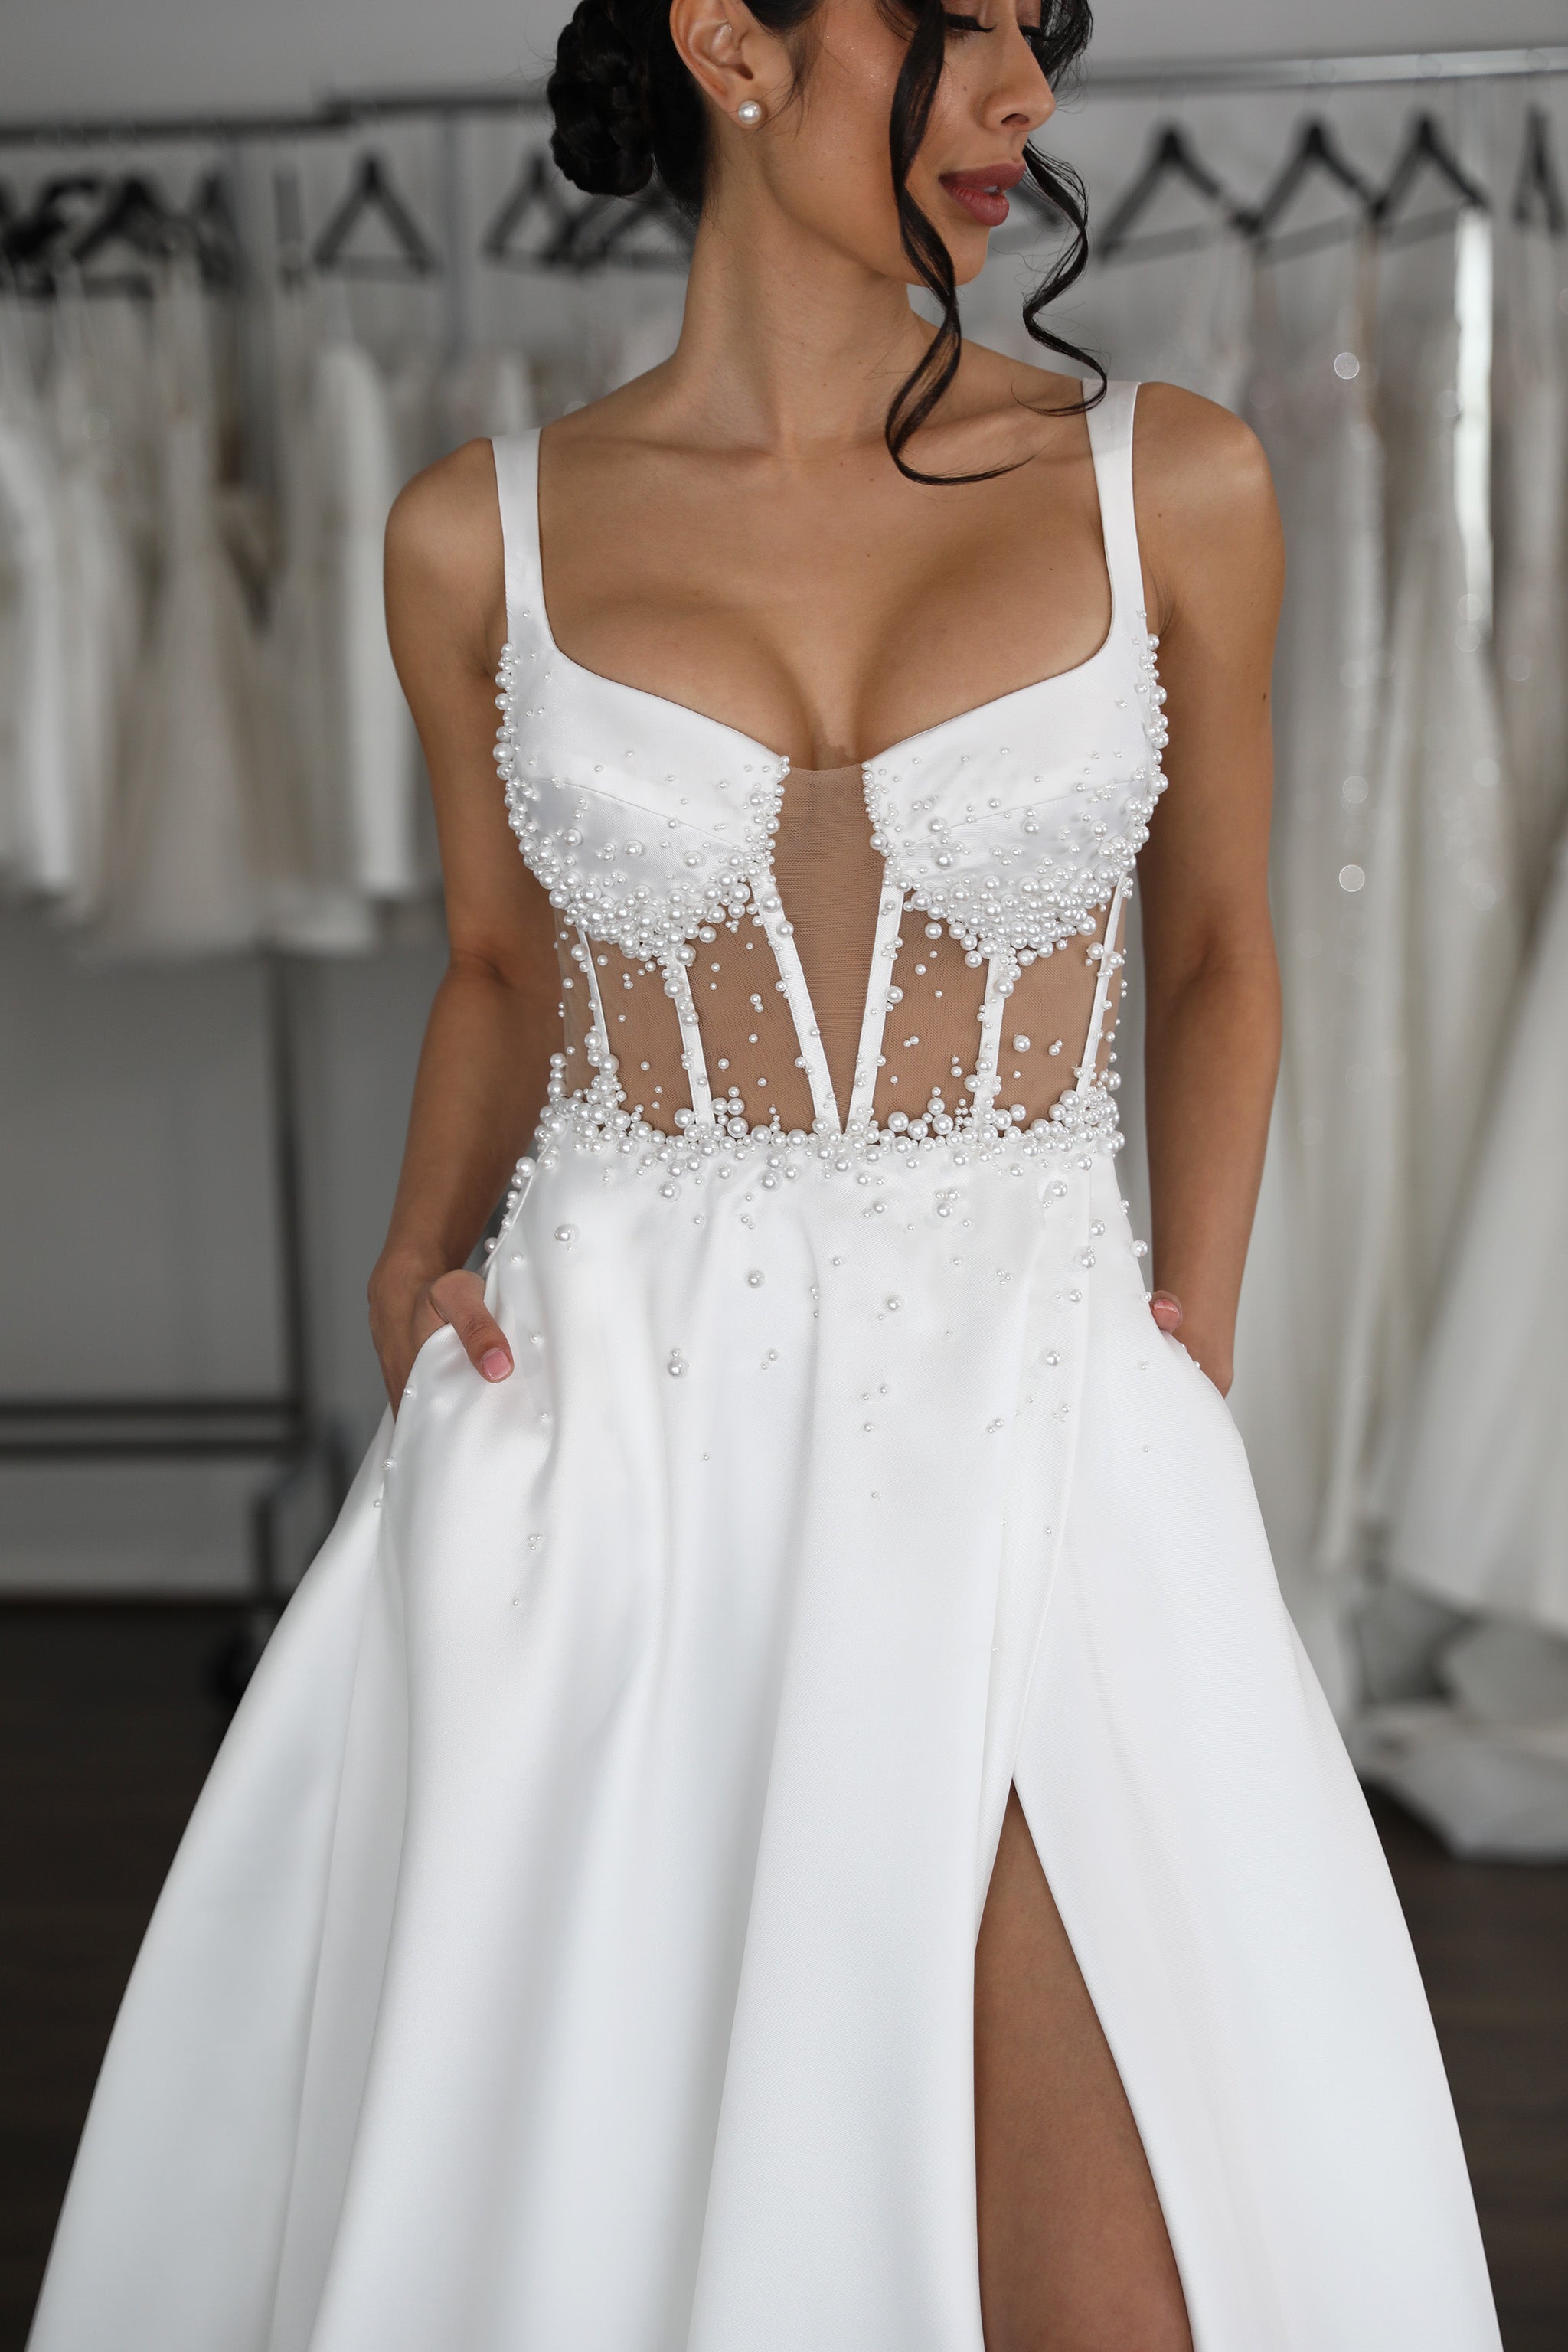 corset top wedding gown adorned with pearls